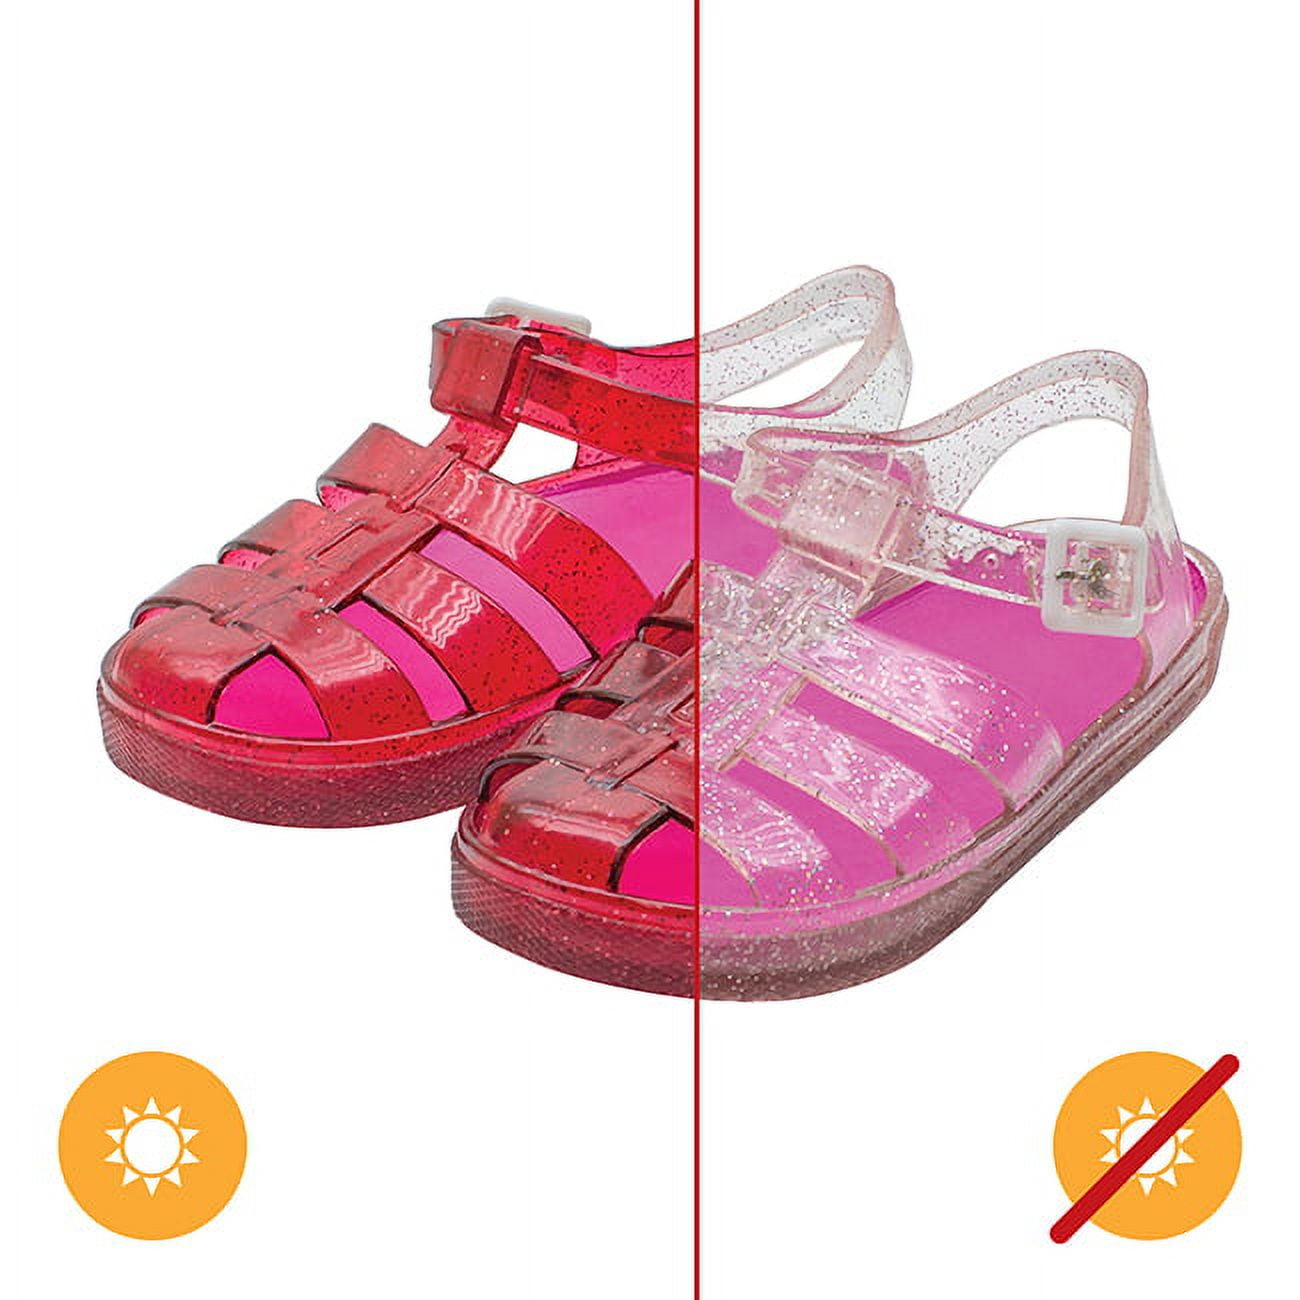 DelSol Color-Changing Jelly Shoes - Princess Slipper - Changes Color from  Clear to Pink in The Sun - Sturdy and Stylish, USA Certified PVC - Kids 9:  Buy Online at Low Prices